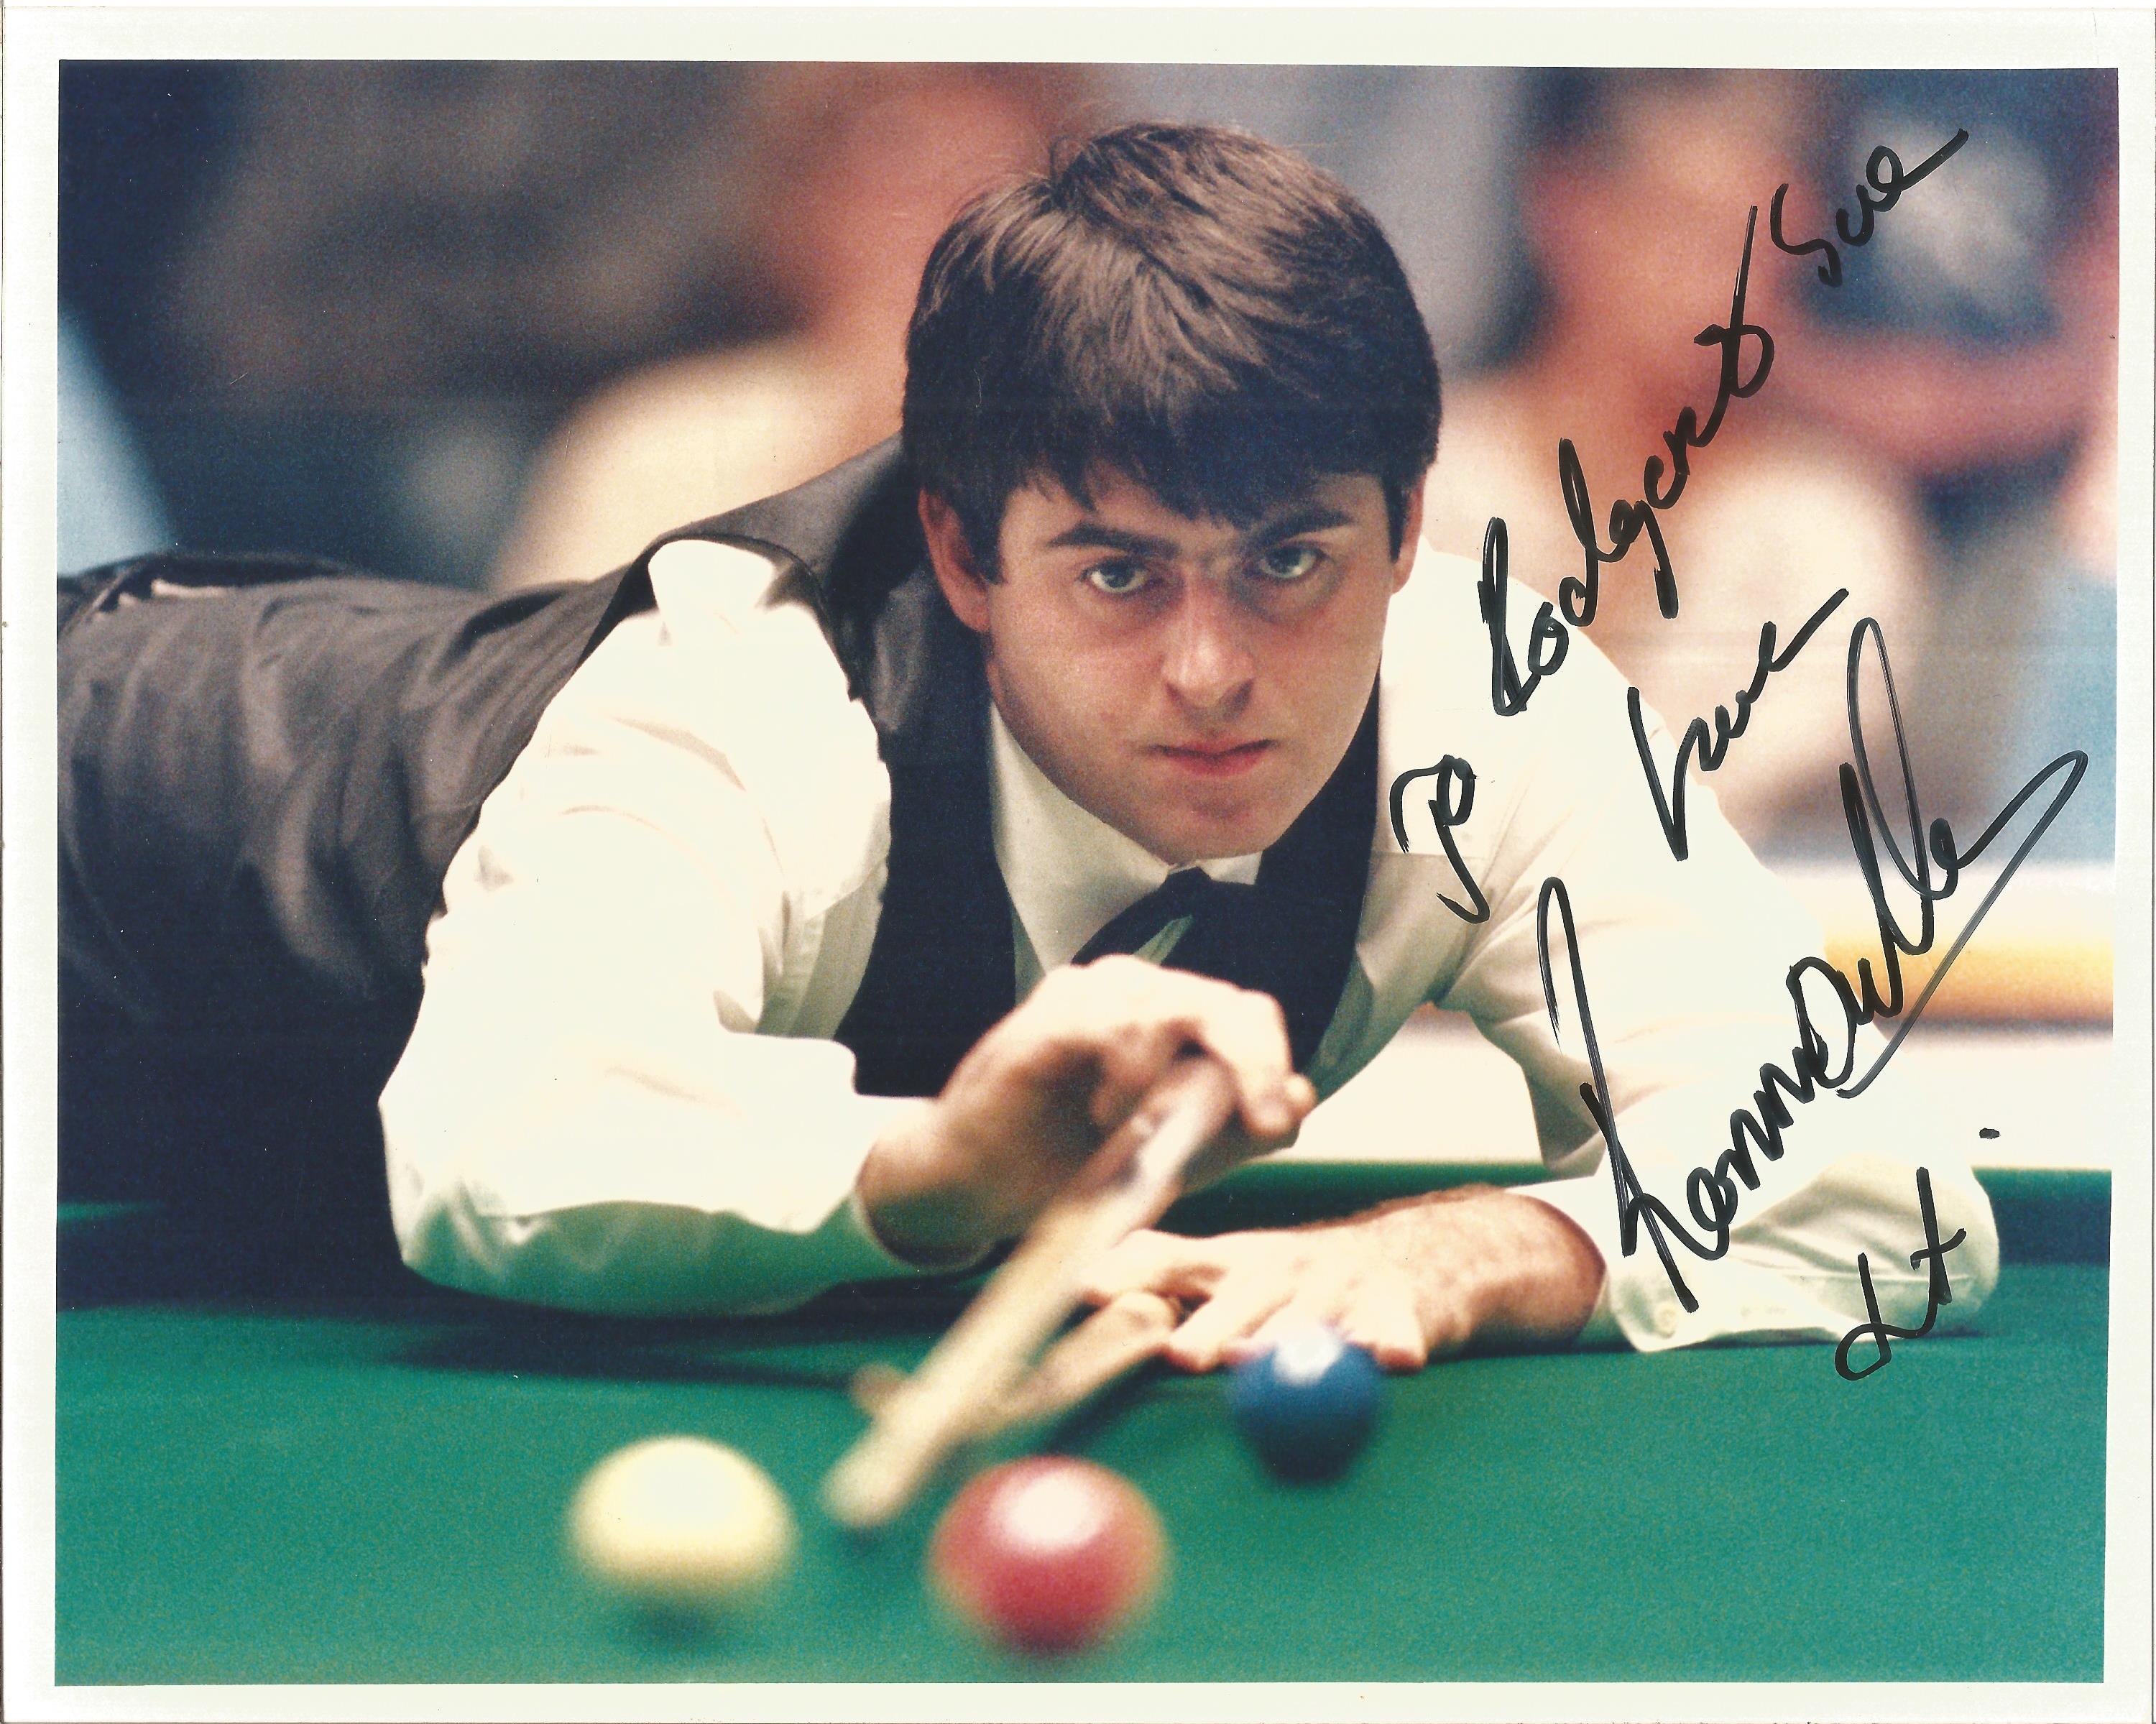 Ronnie O'Sullivan Signed Snooker 1996 Press 8x10 Photo. Good condition. All autographs come with a